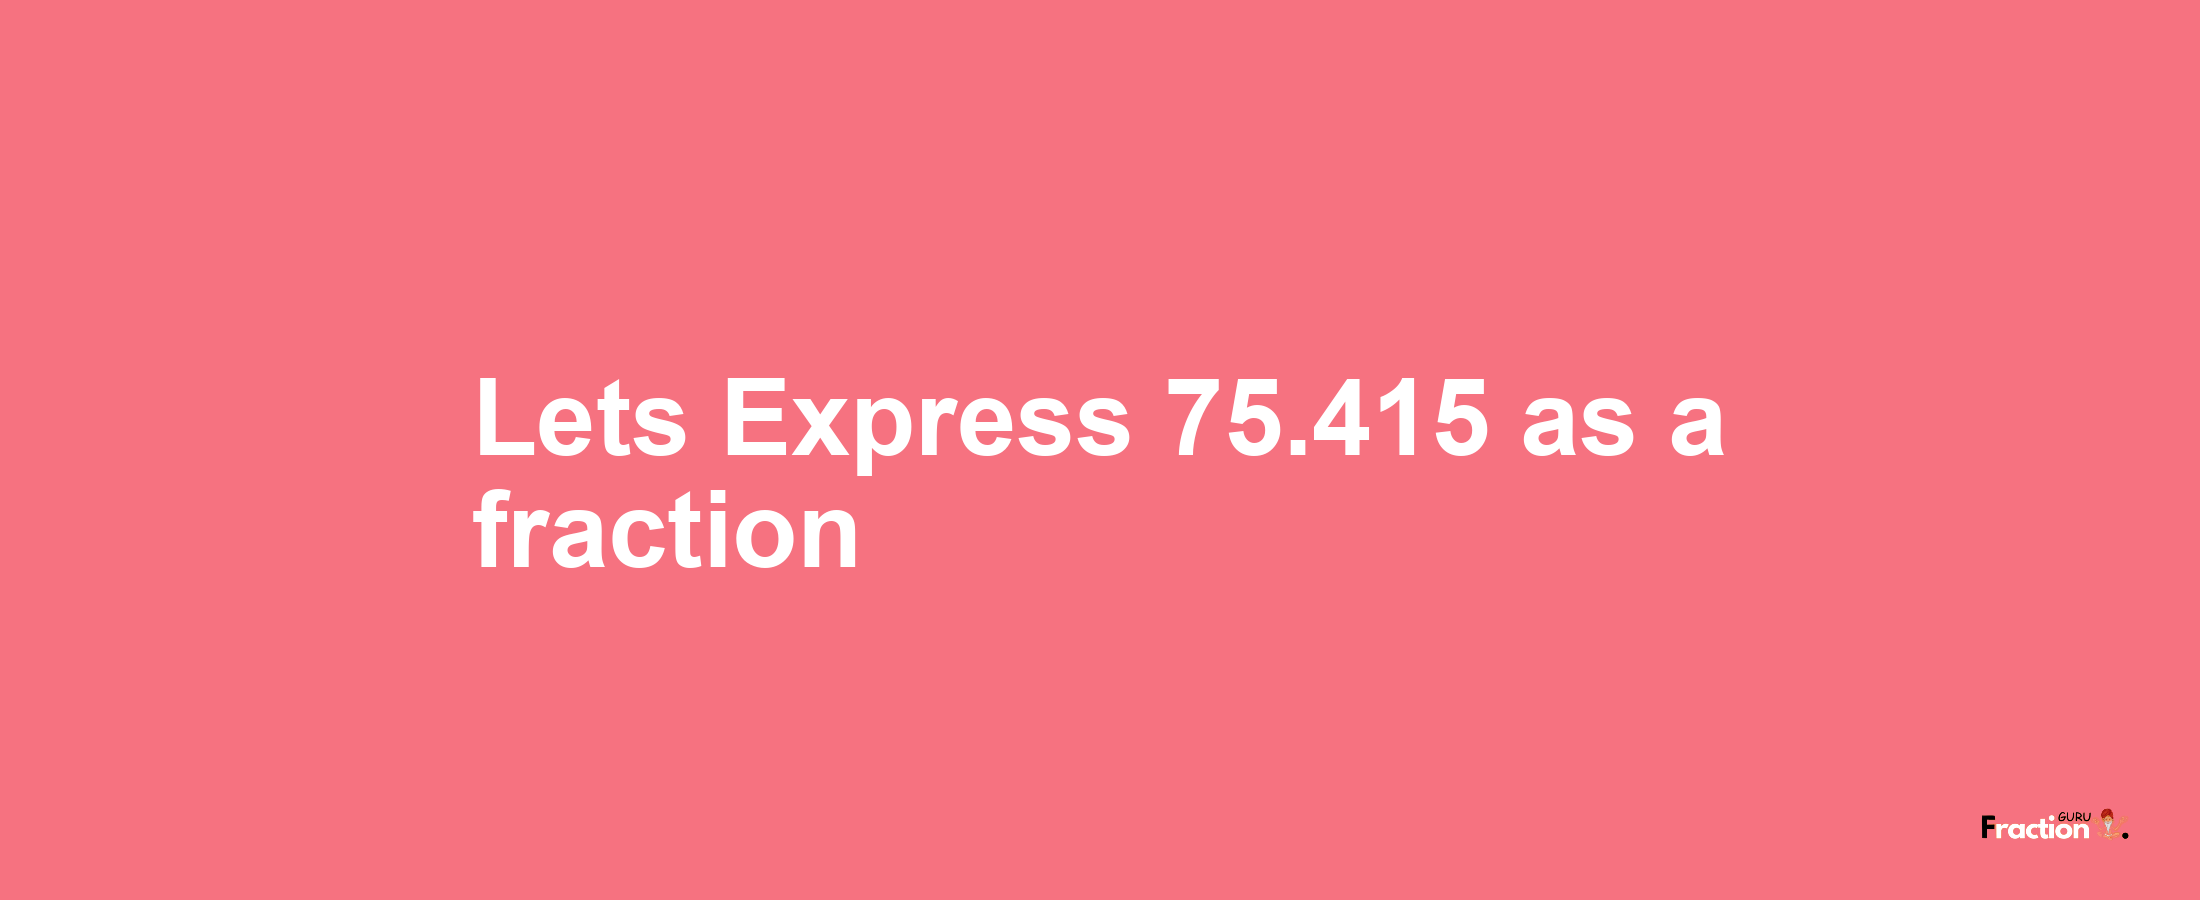 Lets Express 75.415 as afraction